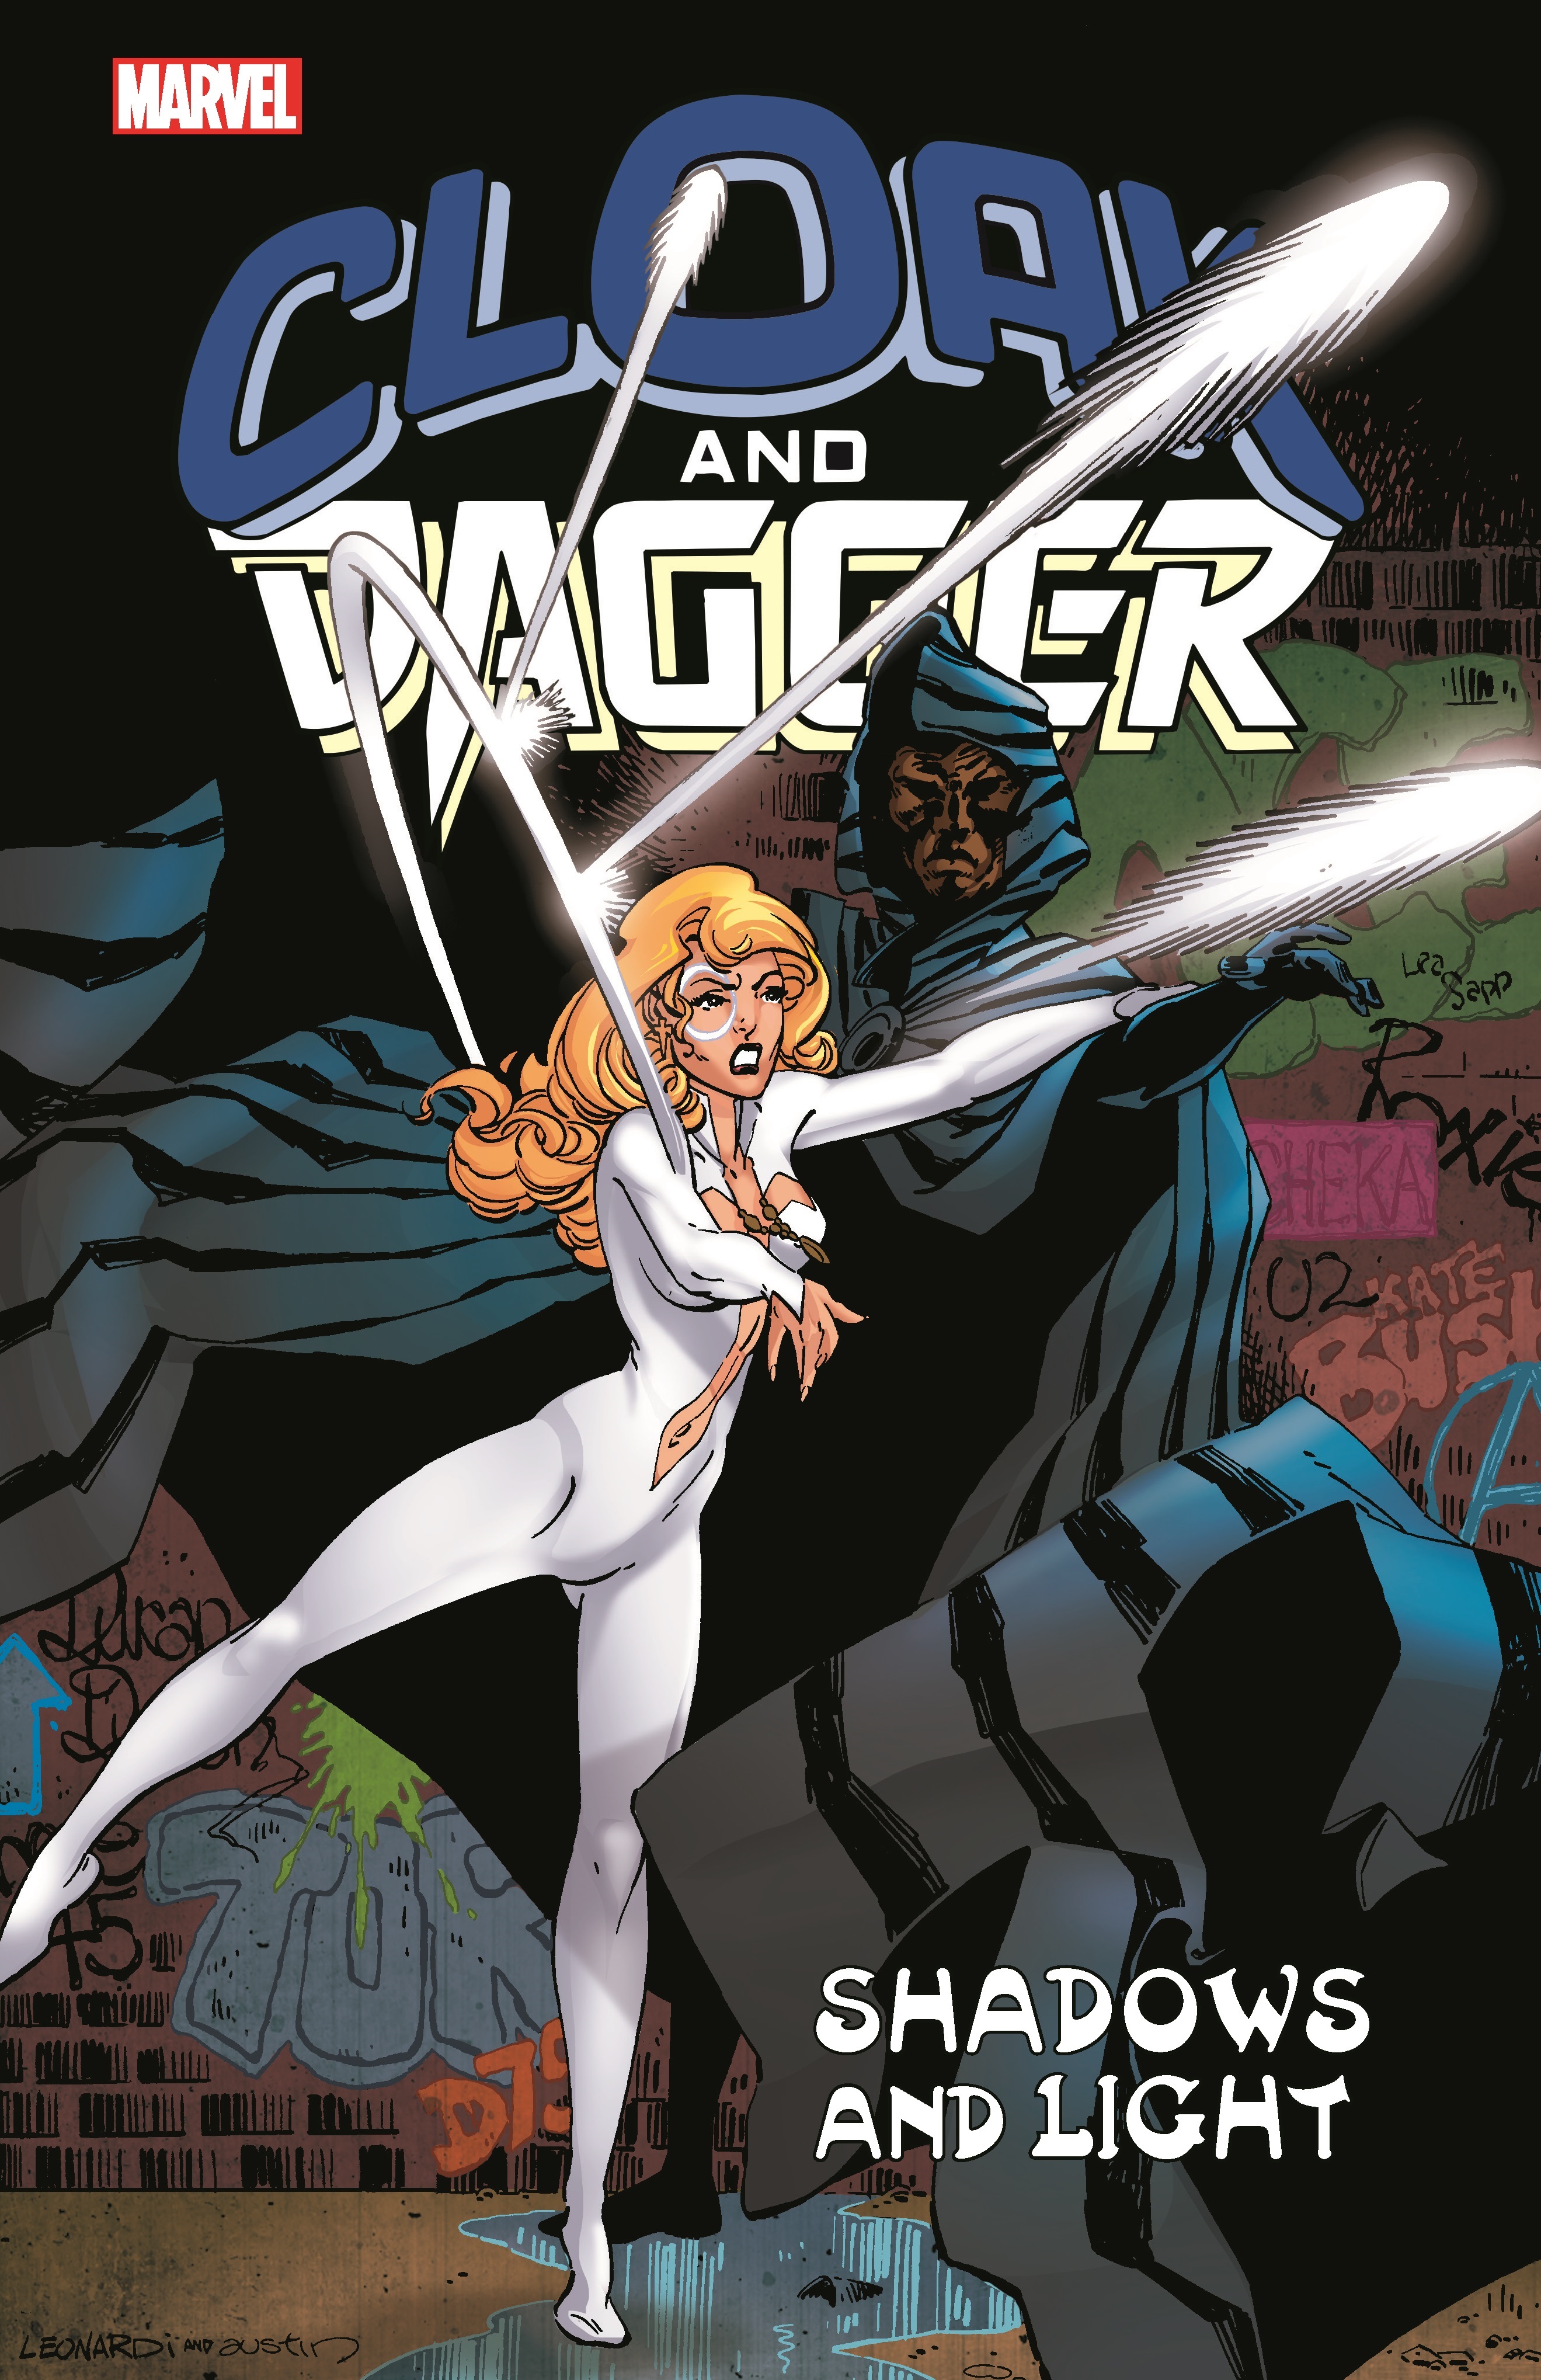 Cloak and Dagger: Shadows and Light (Trade Paperback)